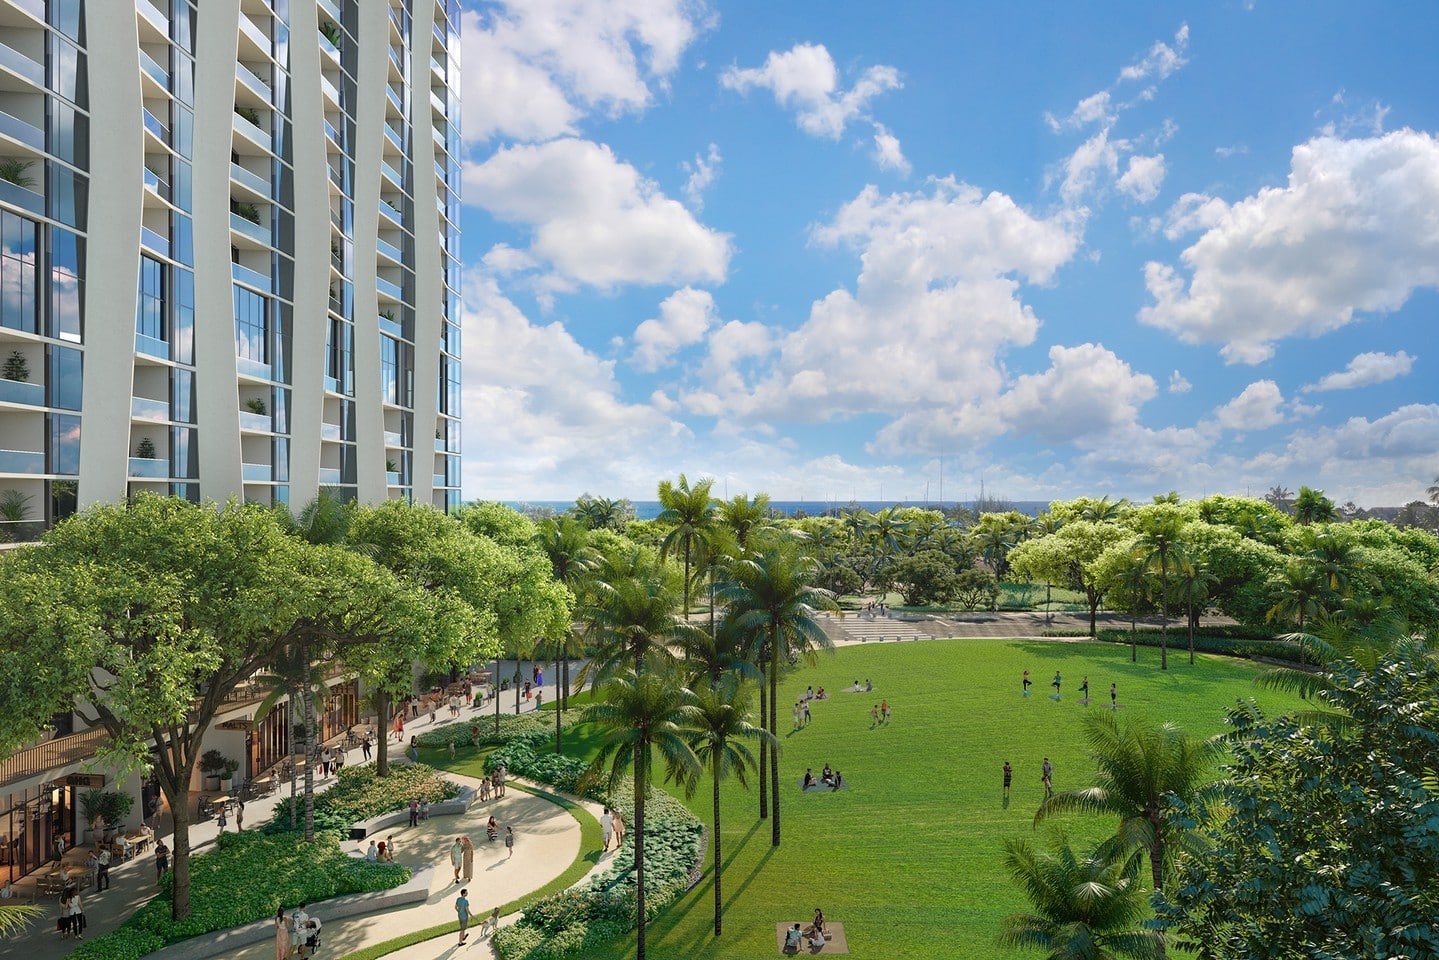 Experience tropical urban living at Kōʻula where the neighboring Victoria Ward Park is yours to explore. Take a stroll, join a yoga class or picnic under the palms, all right outside your door. Learn more about the green spaces within and surrounding these inspiring residences opening Fall of 2022 at https://www.koulawardvillage.com/